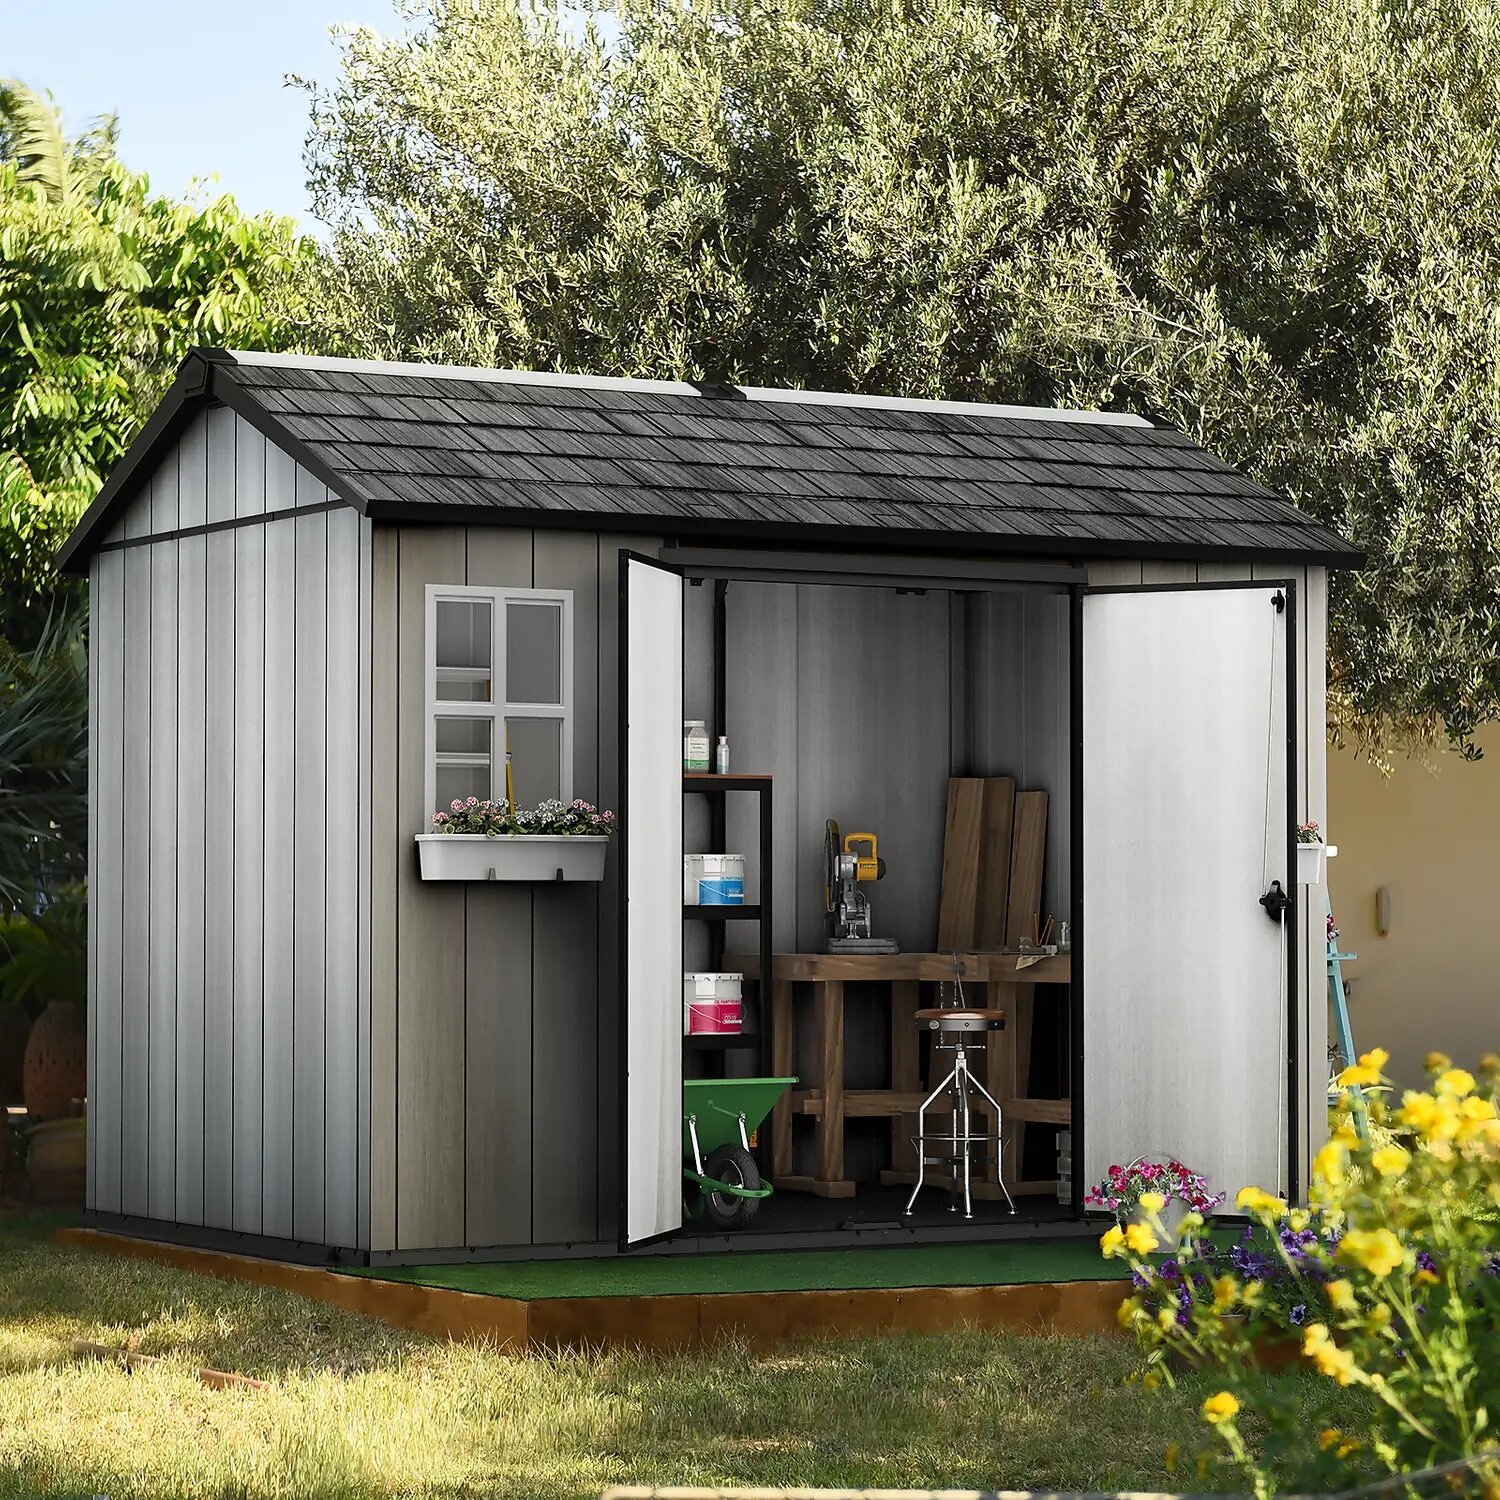 an image of a plastic garden shed